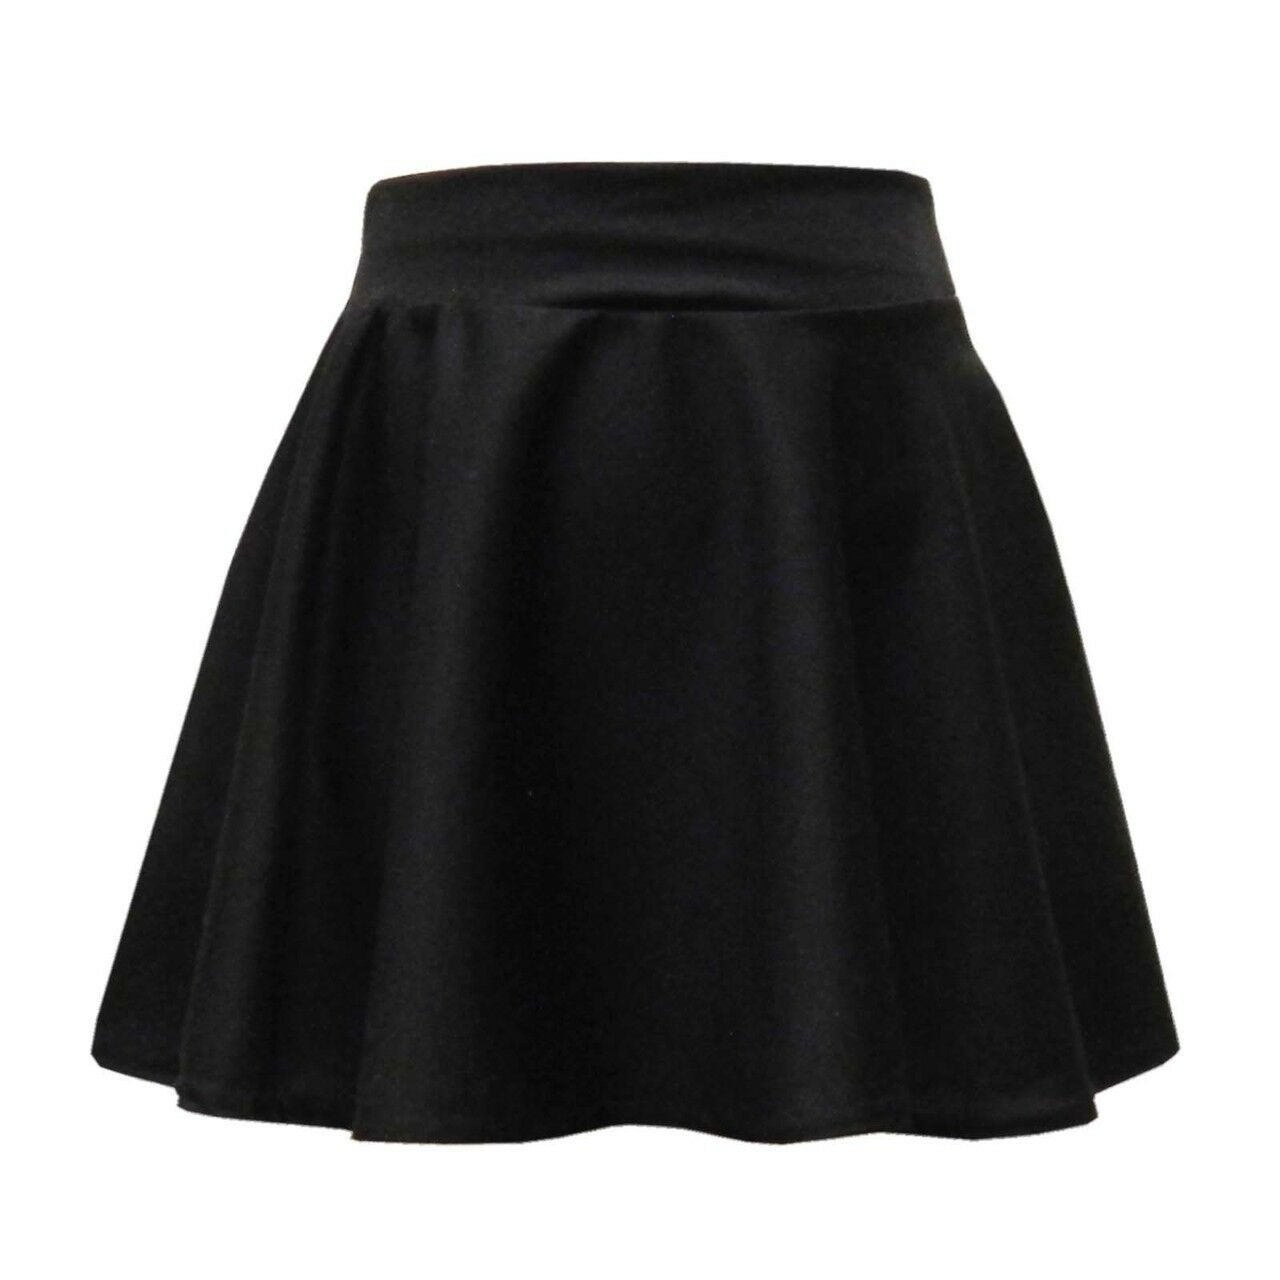 Skater Skirt Skirts Girls Kids Casual Party and School Wear Black 7 to 13 Years